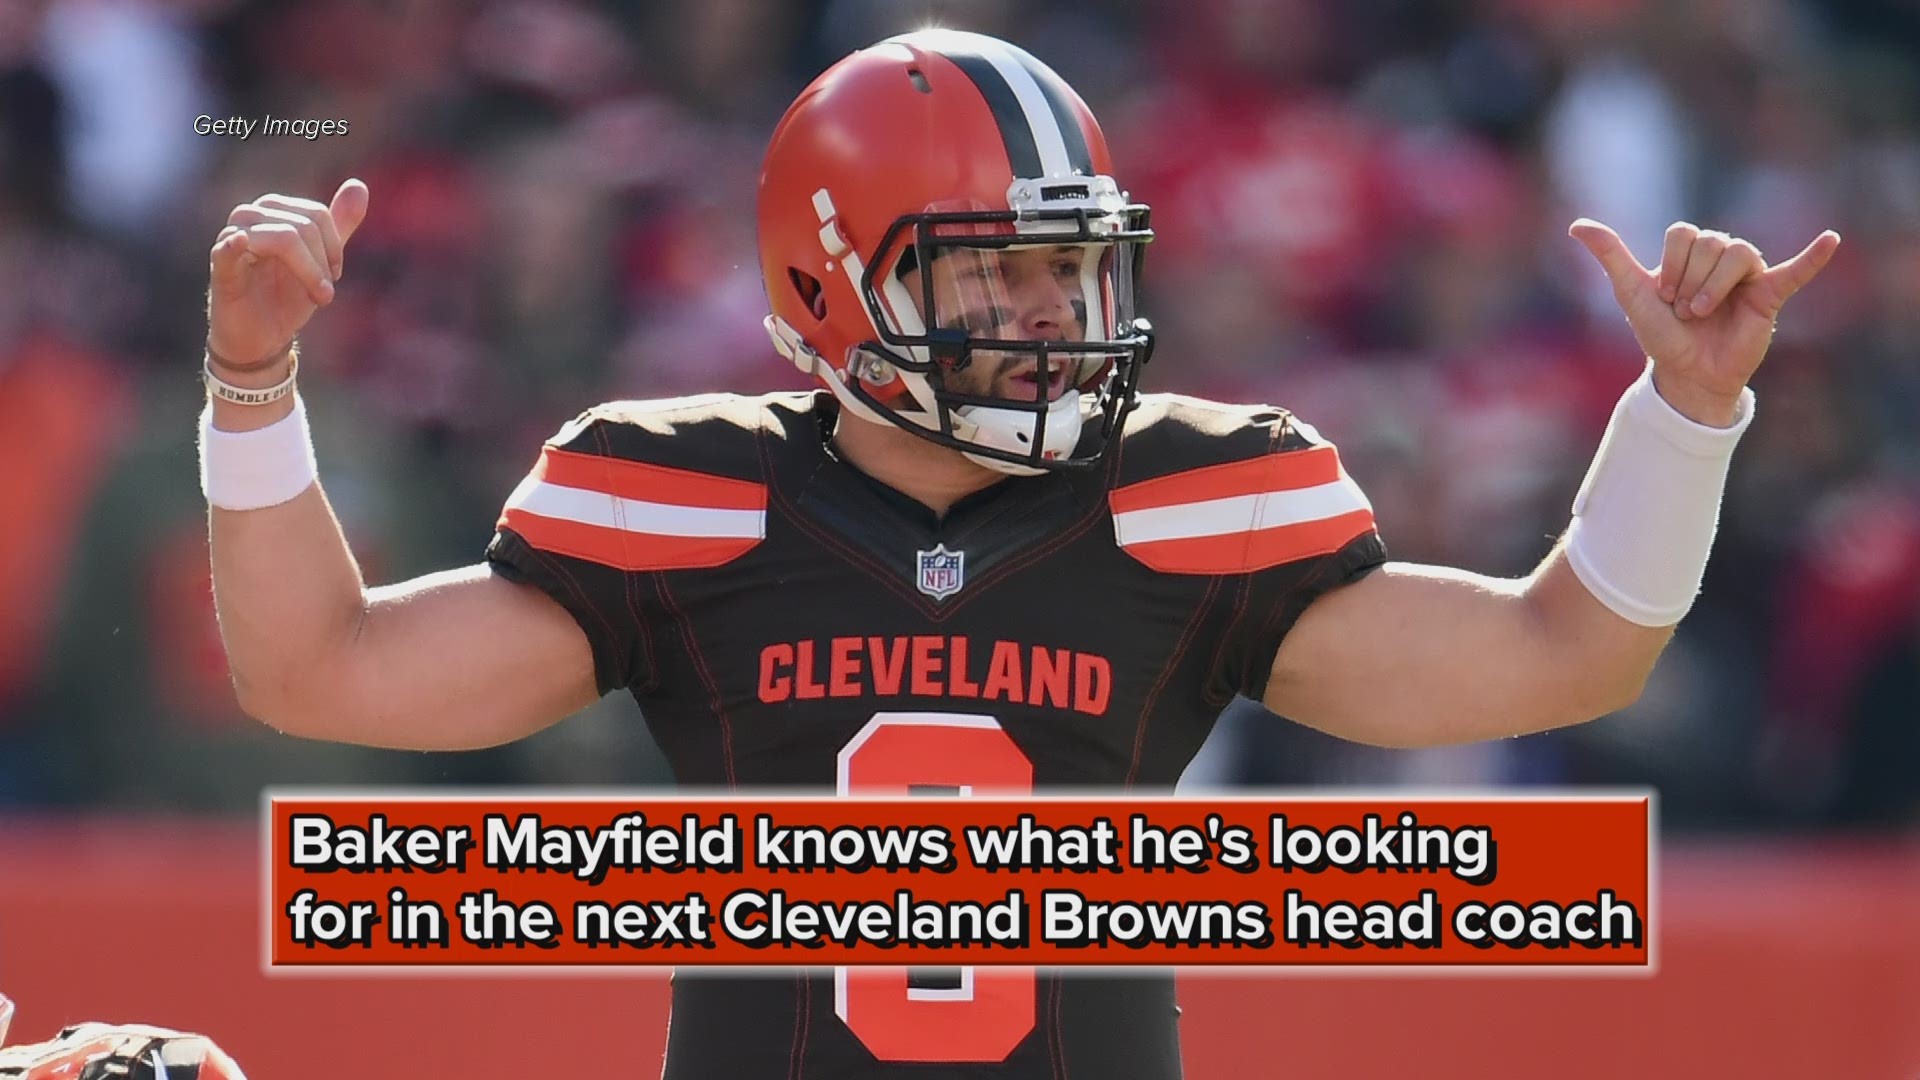 Baker Mayfield discusses what he's looking for in the next Cleveland Browns head coach